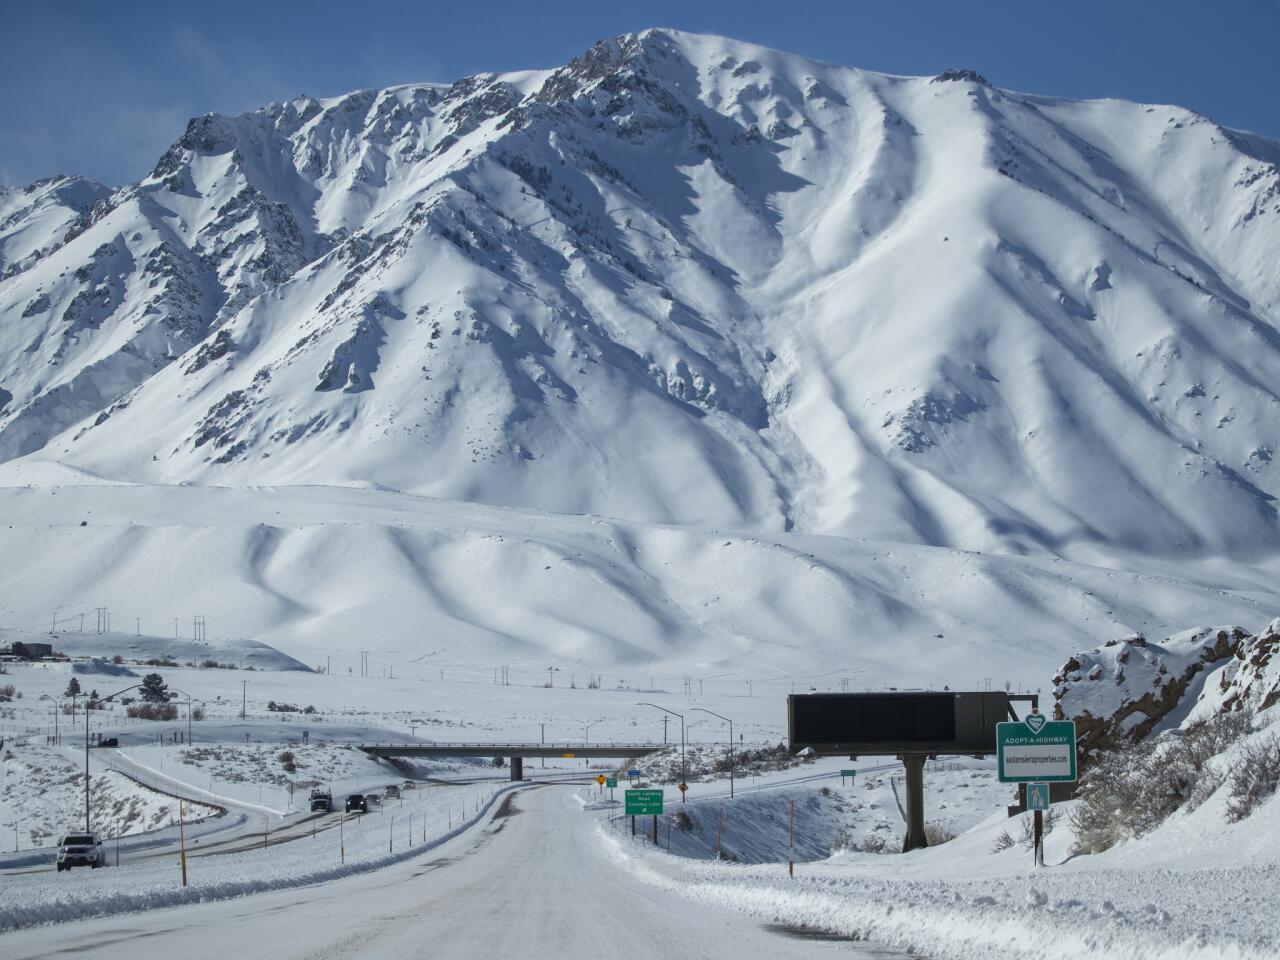 Snow blankets Highway 395 and the Eastern Sierra Nevada Mountains near Crowley Lake.